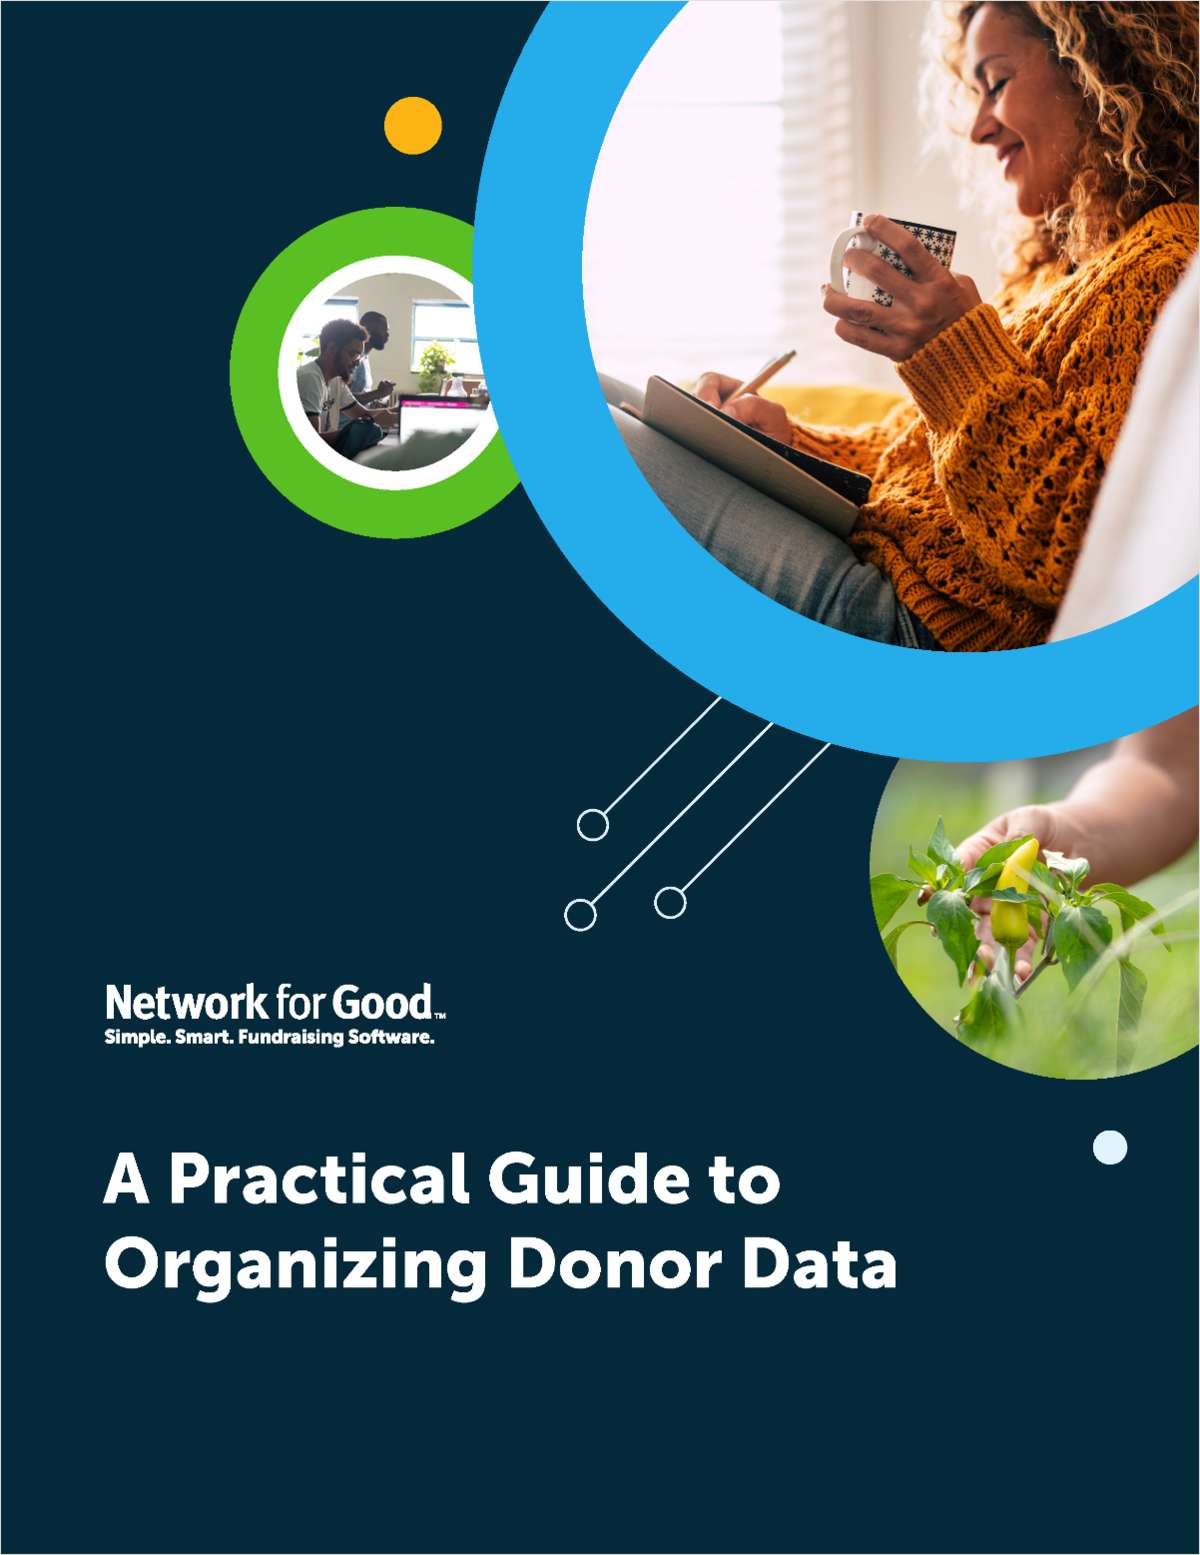 Donor Management Strategies: How to Organize Your Donor Data